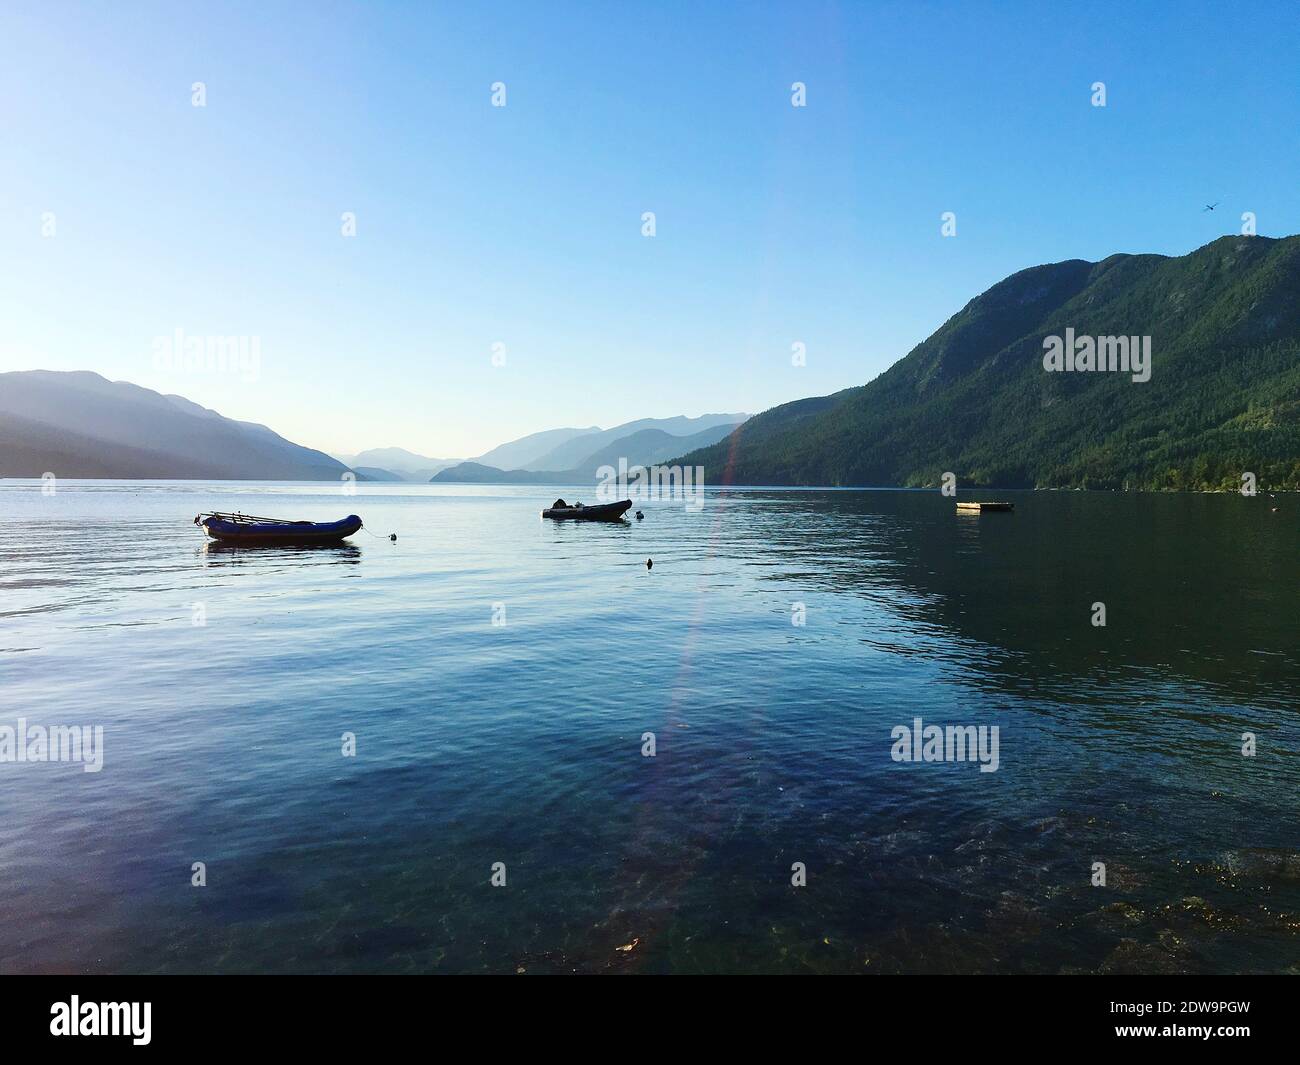 Scenic View Of Lake Against Clear Blue Sky Stock Photo